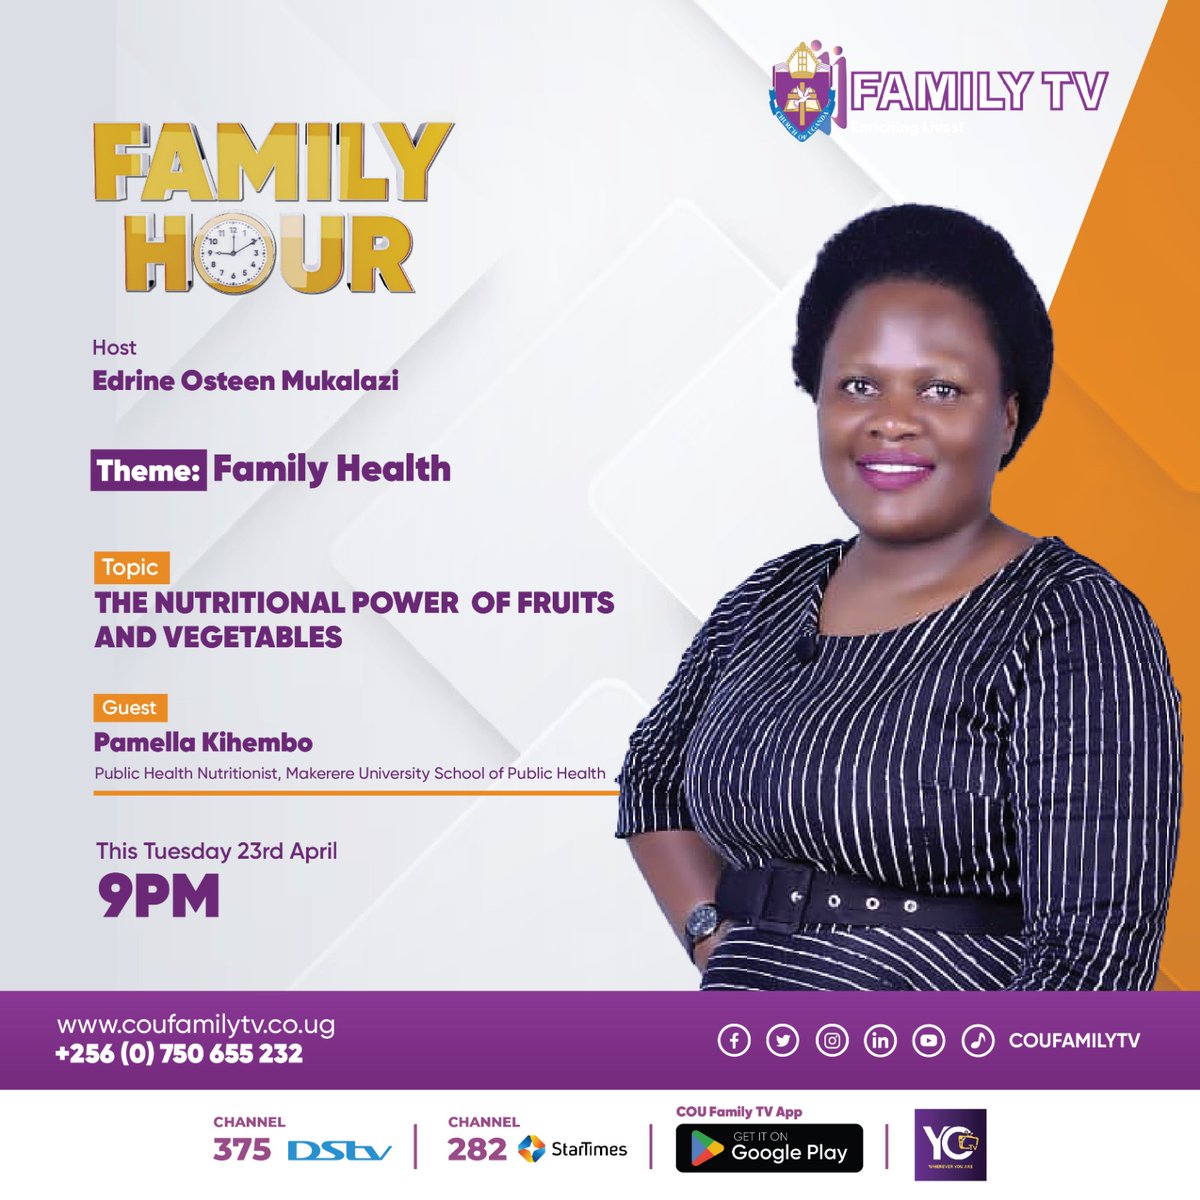 Fruits and vegetables help you maintain good health. Join @EdrineMukalazi on today's episode of #FamilyHour about health, as he hosts Pamella Kihembo, Public Health Nutritionist @MakSPH to share the nutritional power of fruits and vegetables. Don't miss out the show at 9PM, DSTV…